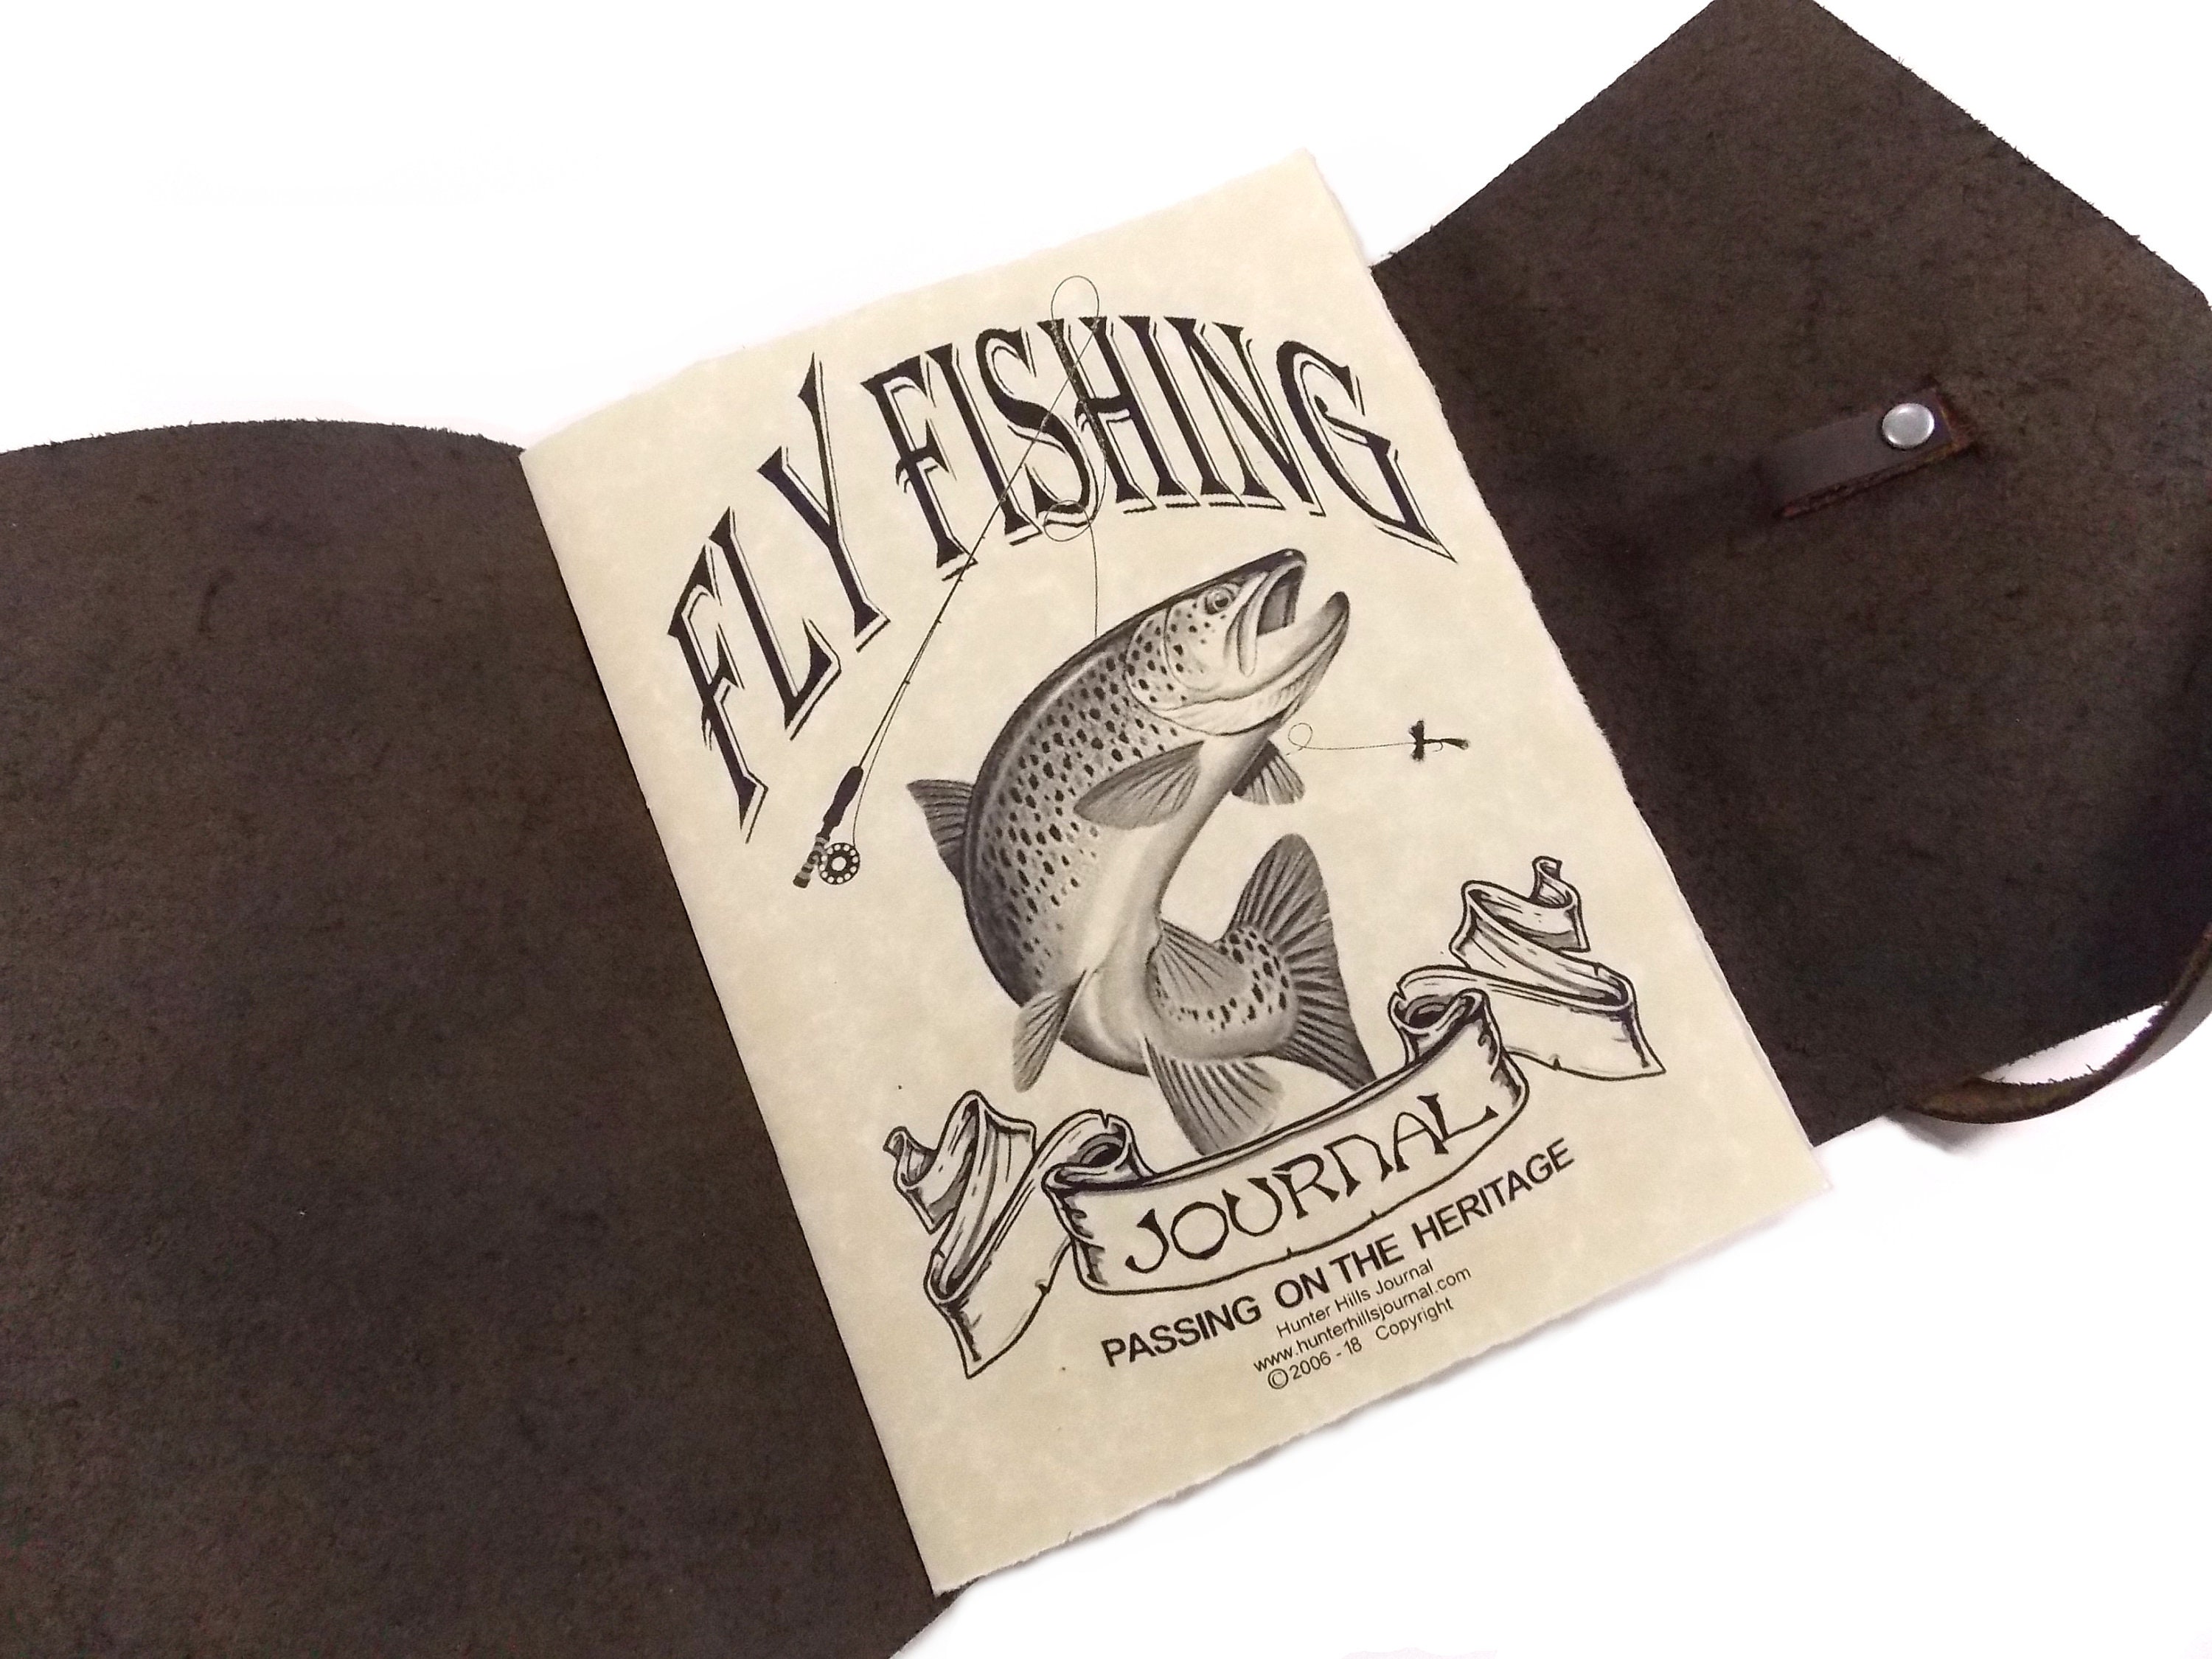 Leather Fishing Book 